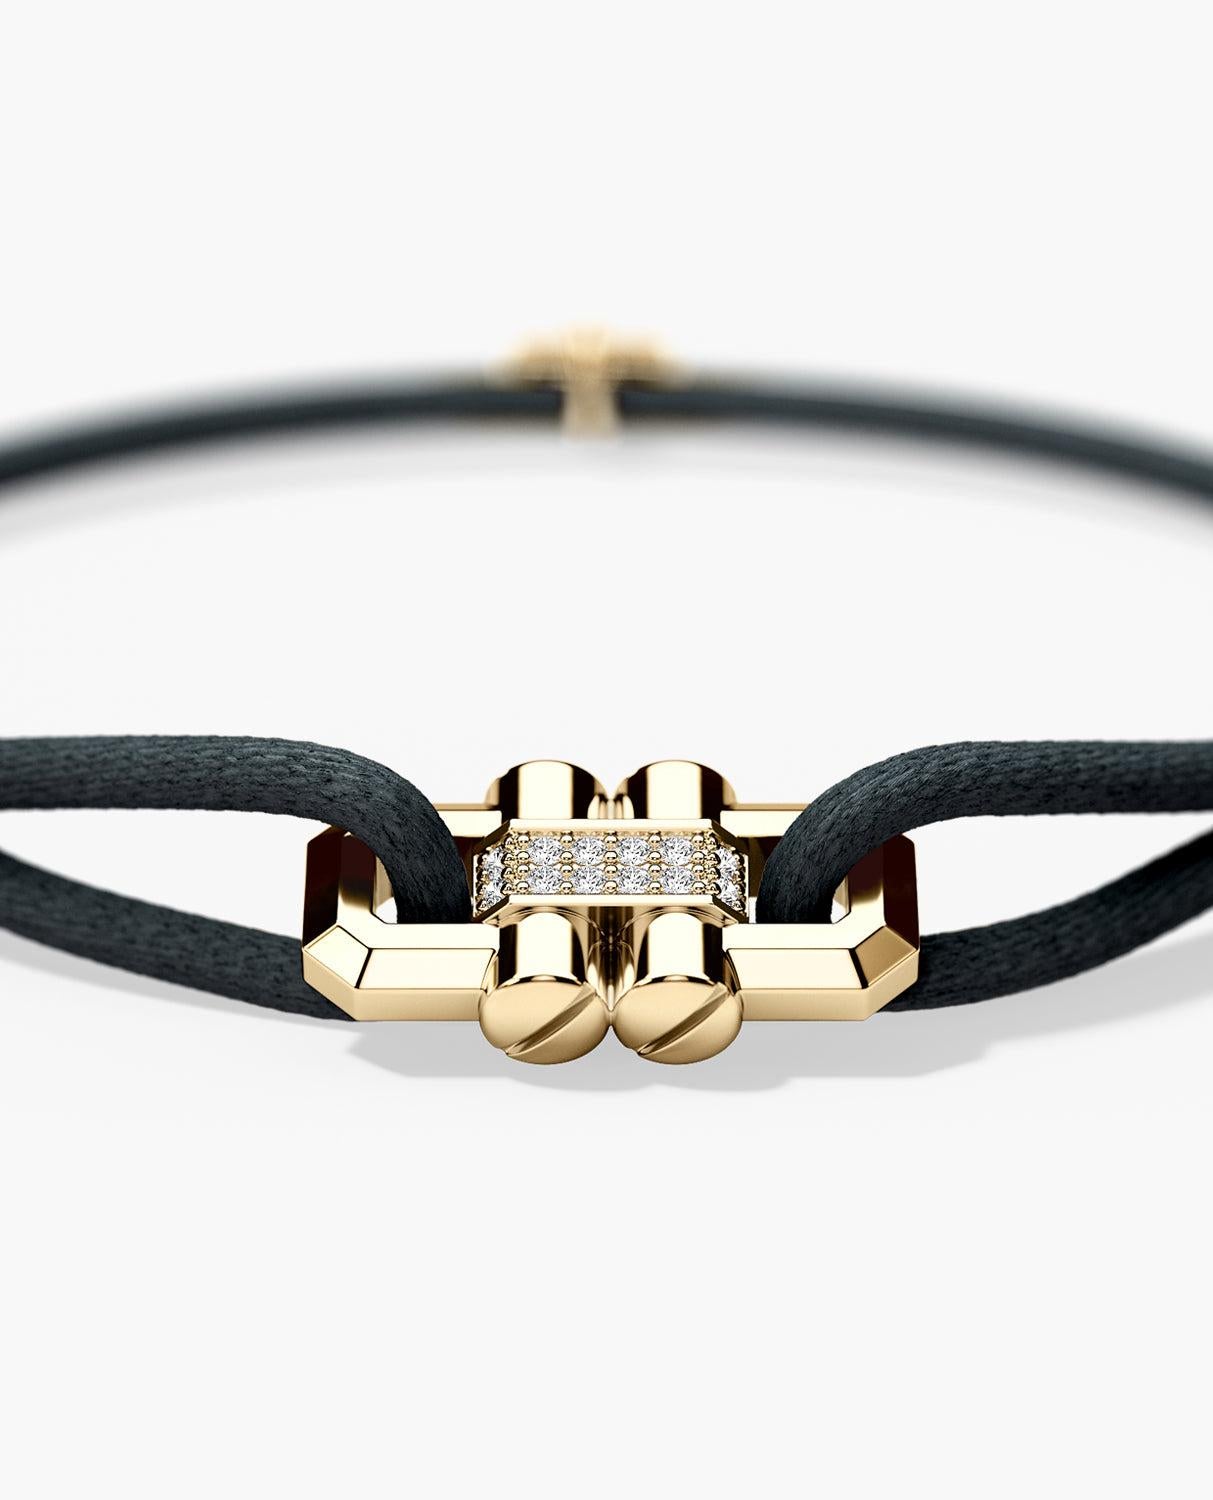 This handmade silk cord bracelet is available in 14k Yellow Gold with 0.12ct white diamonds. Customize your bracelet further by choosing either a black or red cord. Ready to Ship bracelets are pre-produced, unworn pieces. These bracelets have a